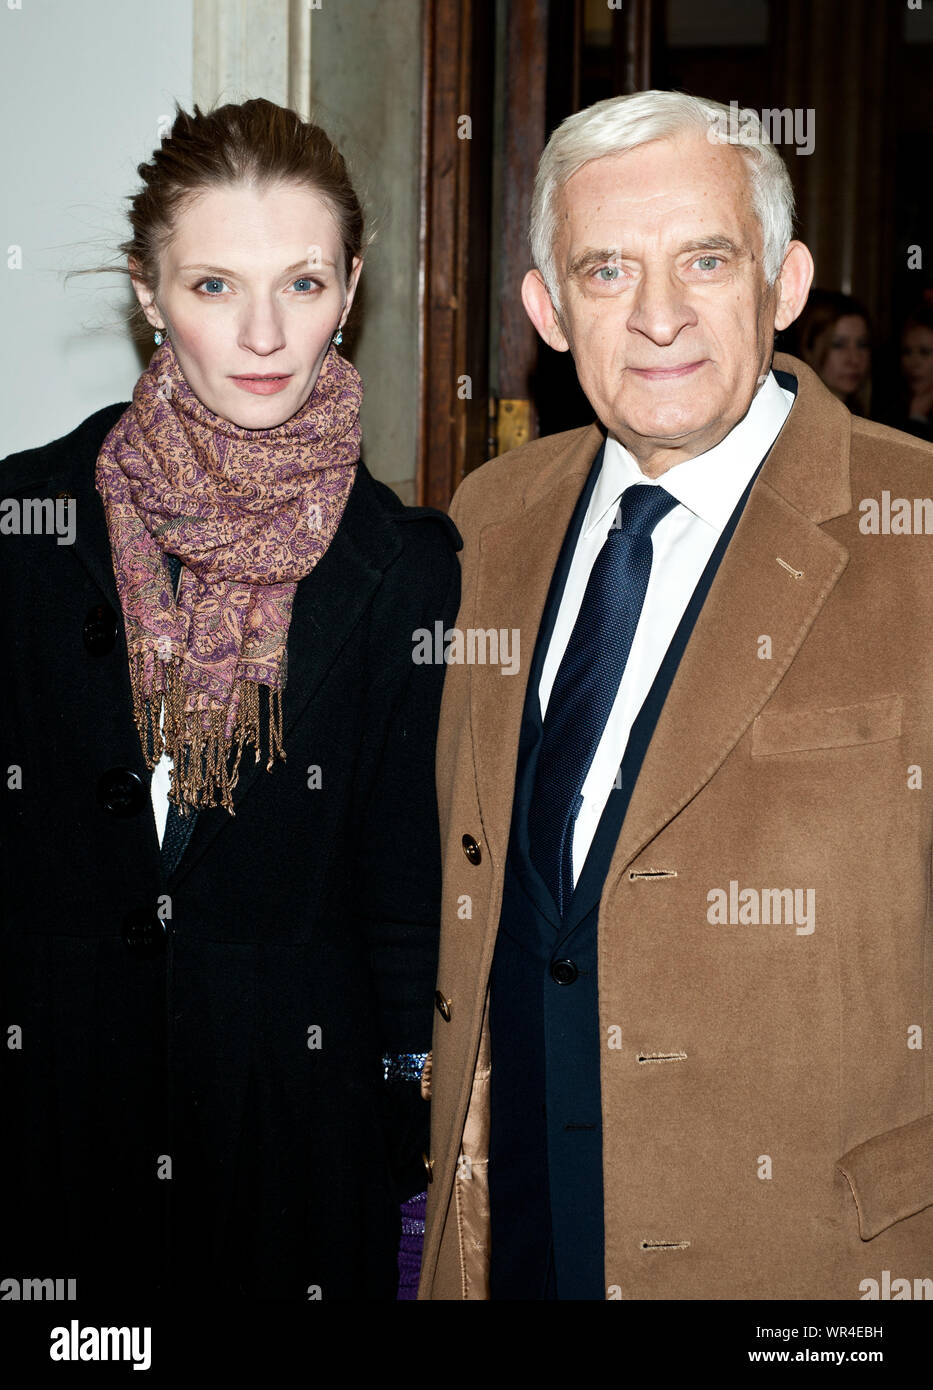 8.12.2012 Warsaw, Poland. Pictured: Jerzy Buzek with his daughter Agata Stock Photo